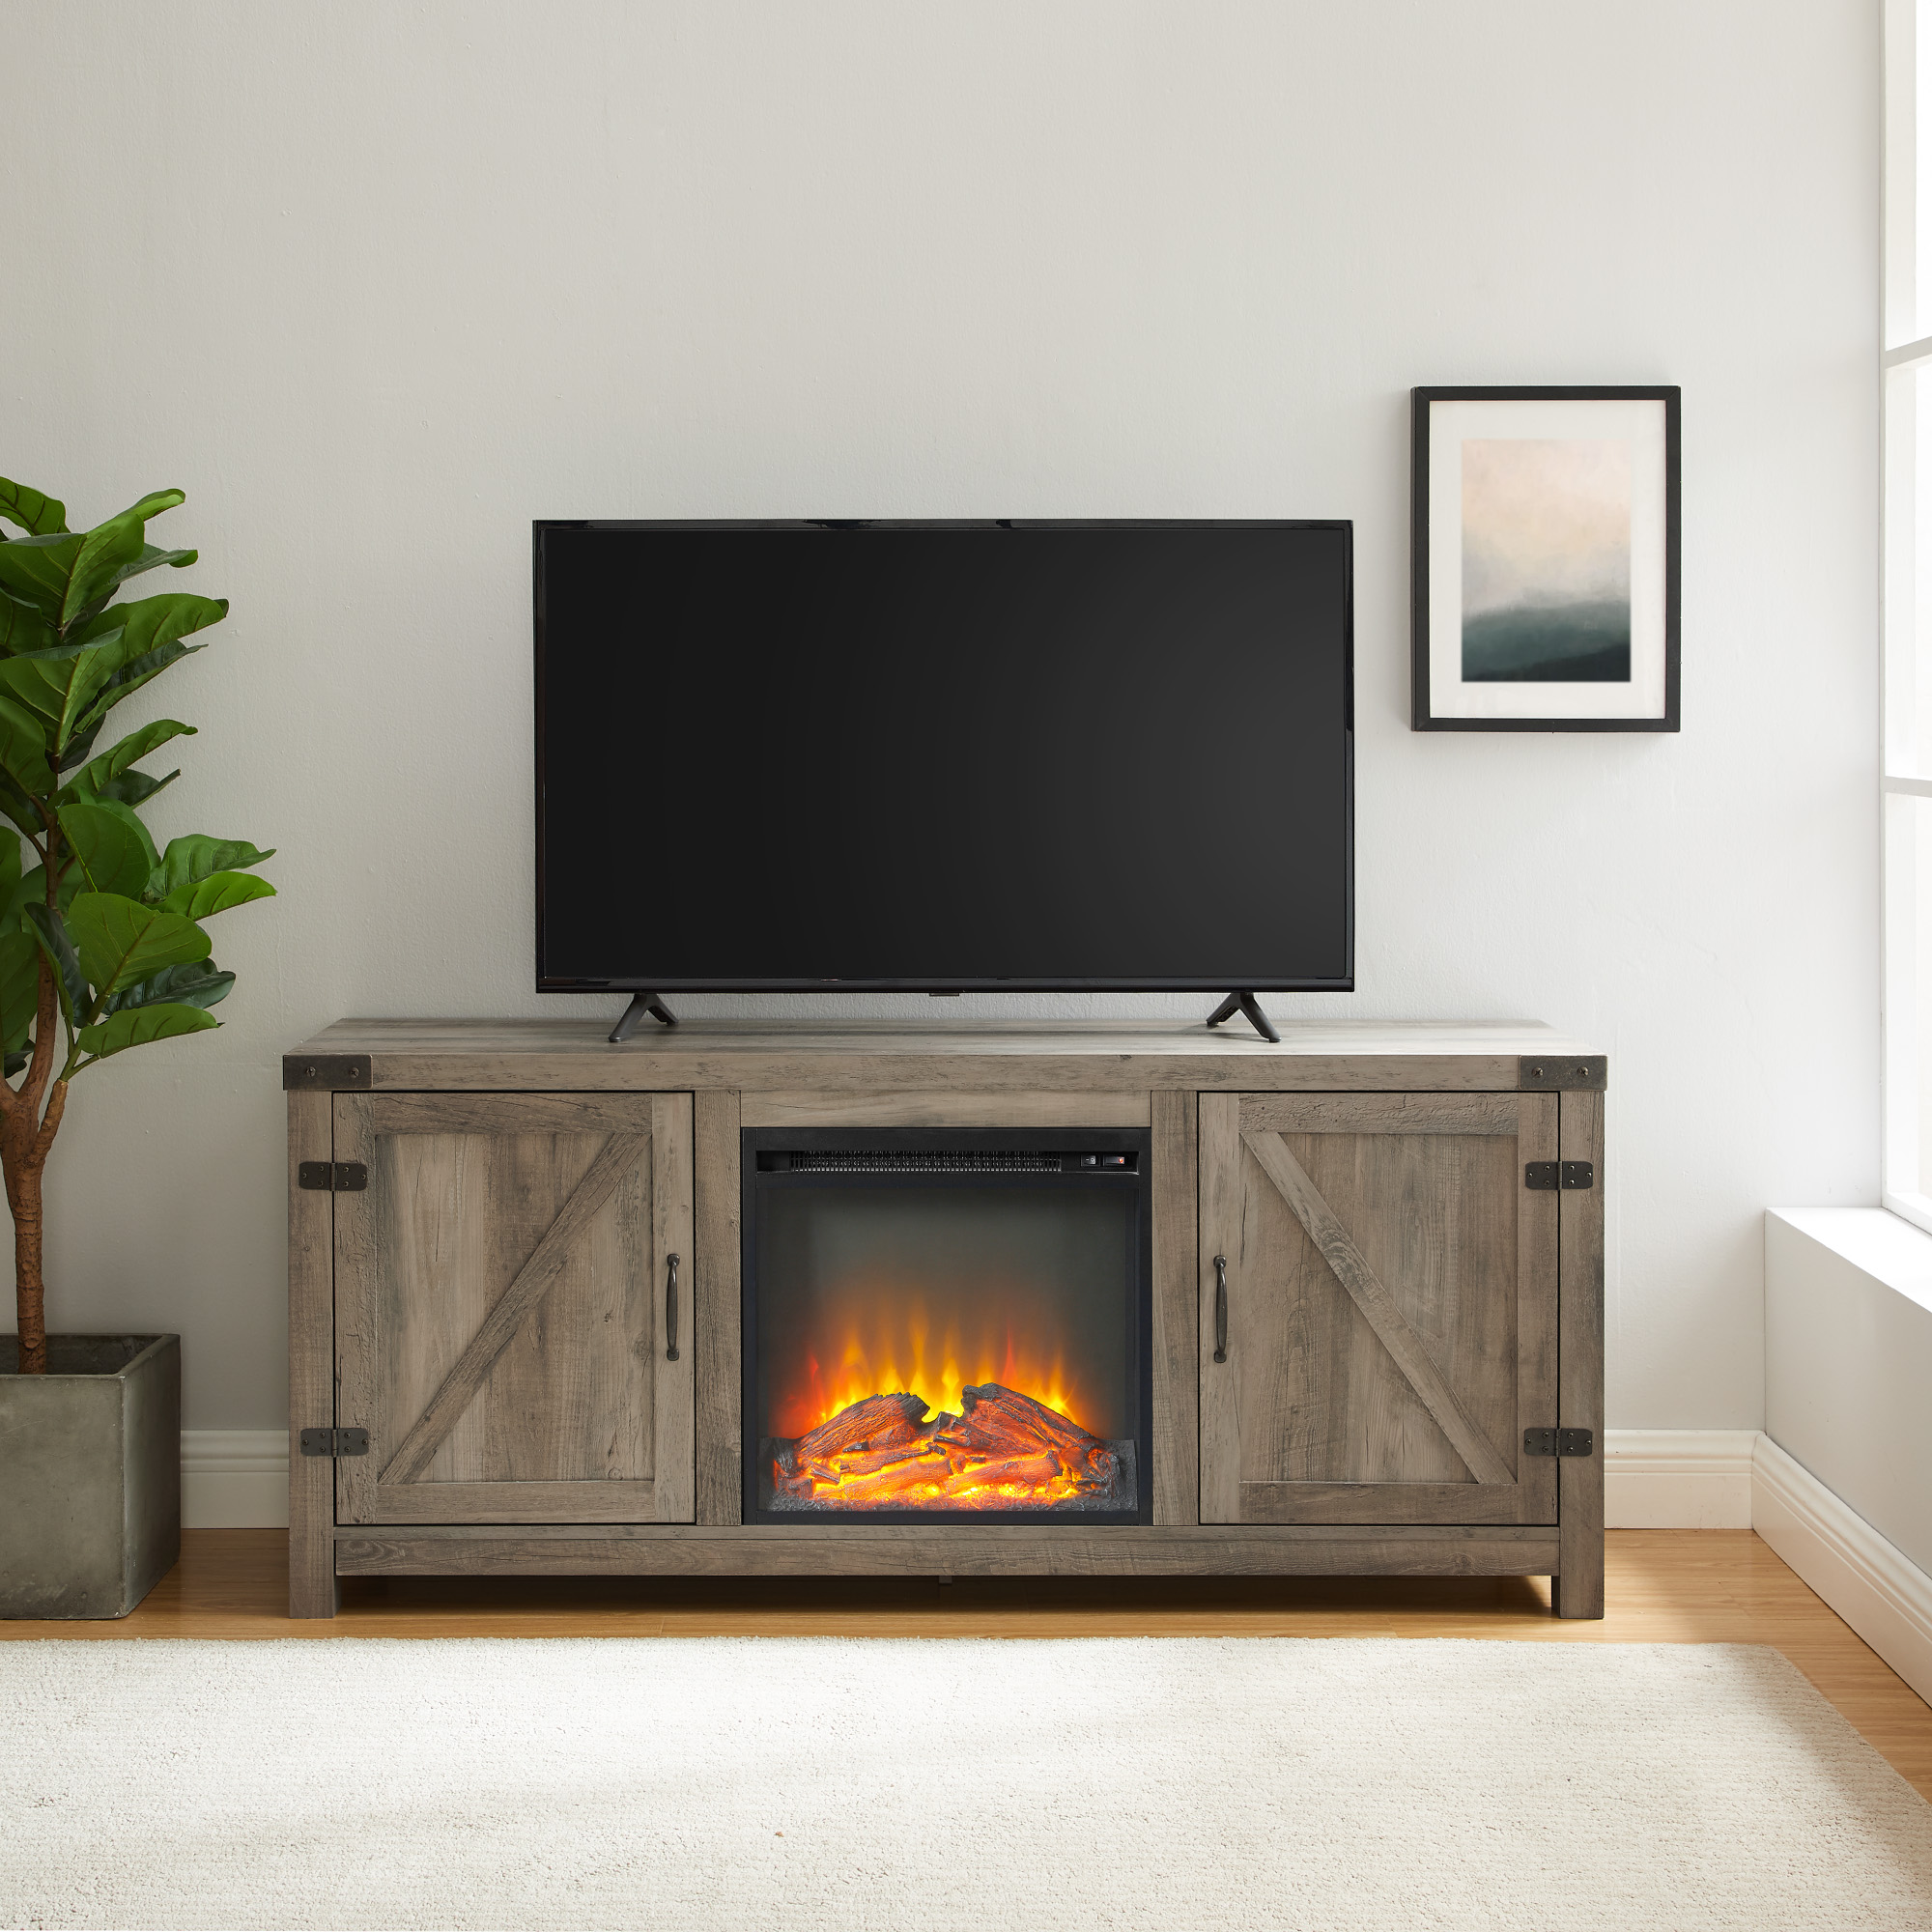 Walker Edison Modern Farmhouse Fireplace TV Stand for TVs up to 65", Grey Wash - image 3 of 11